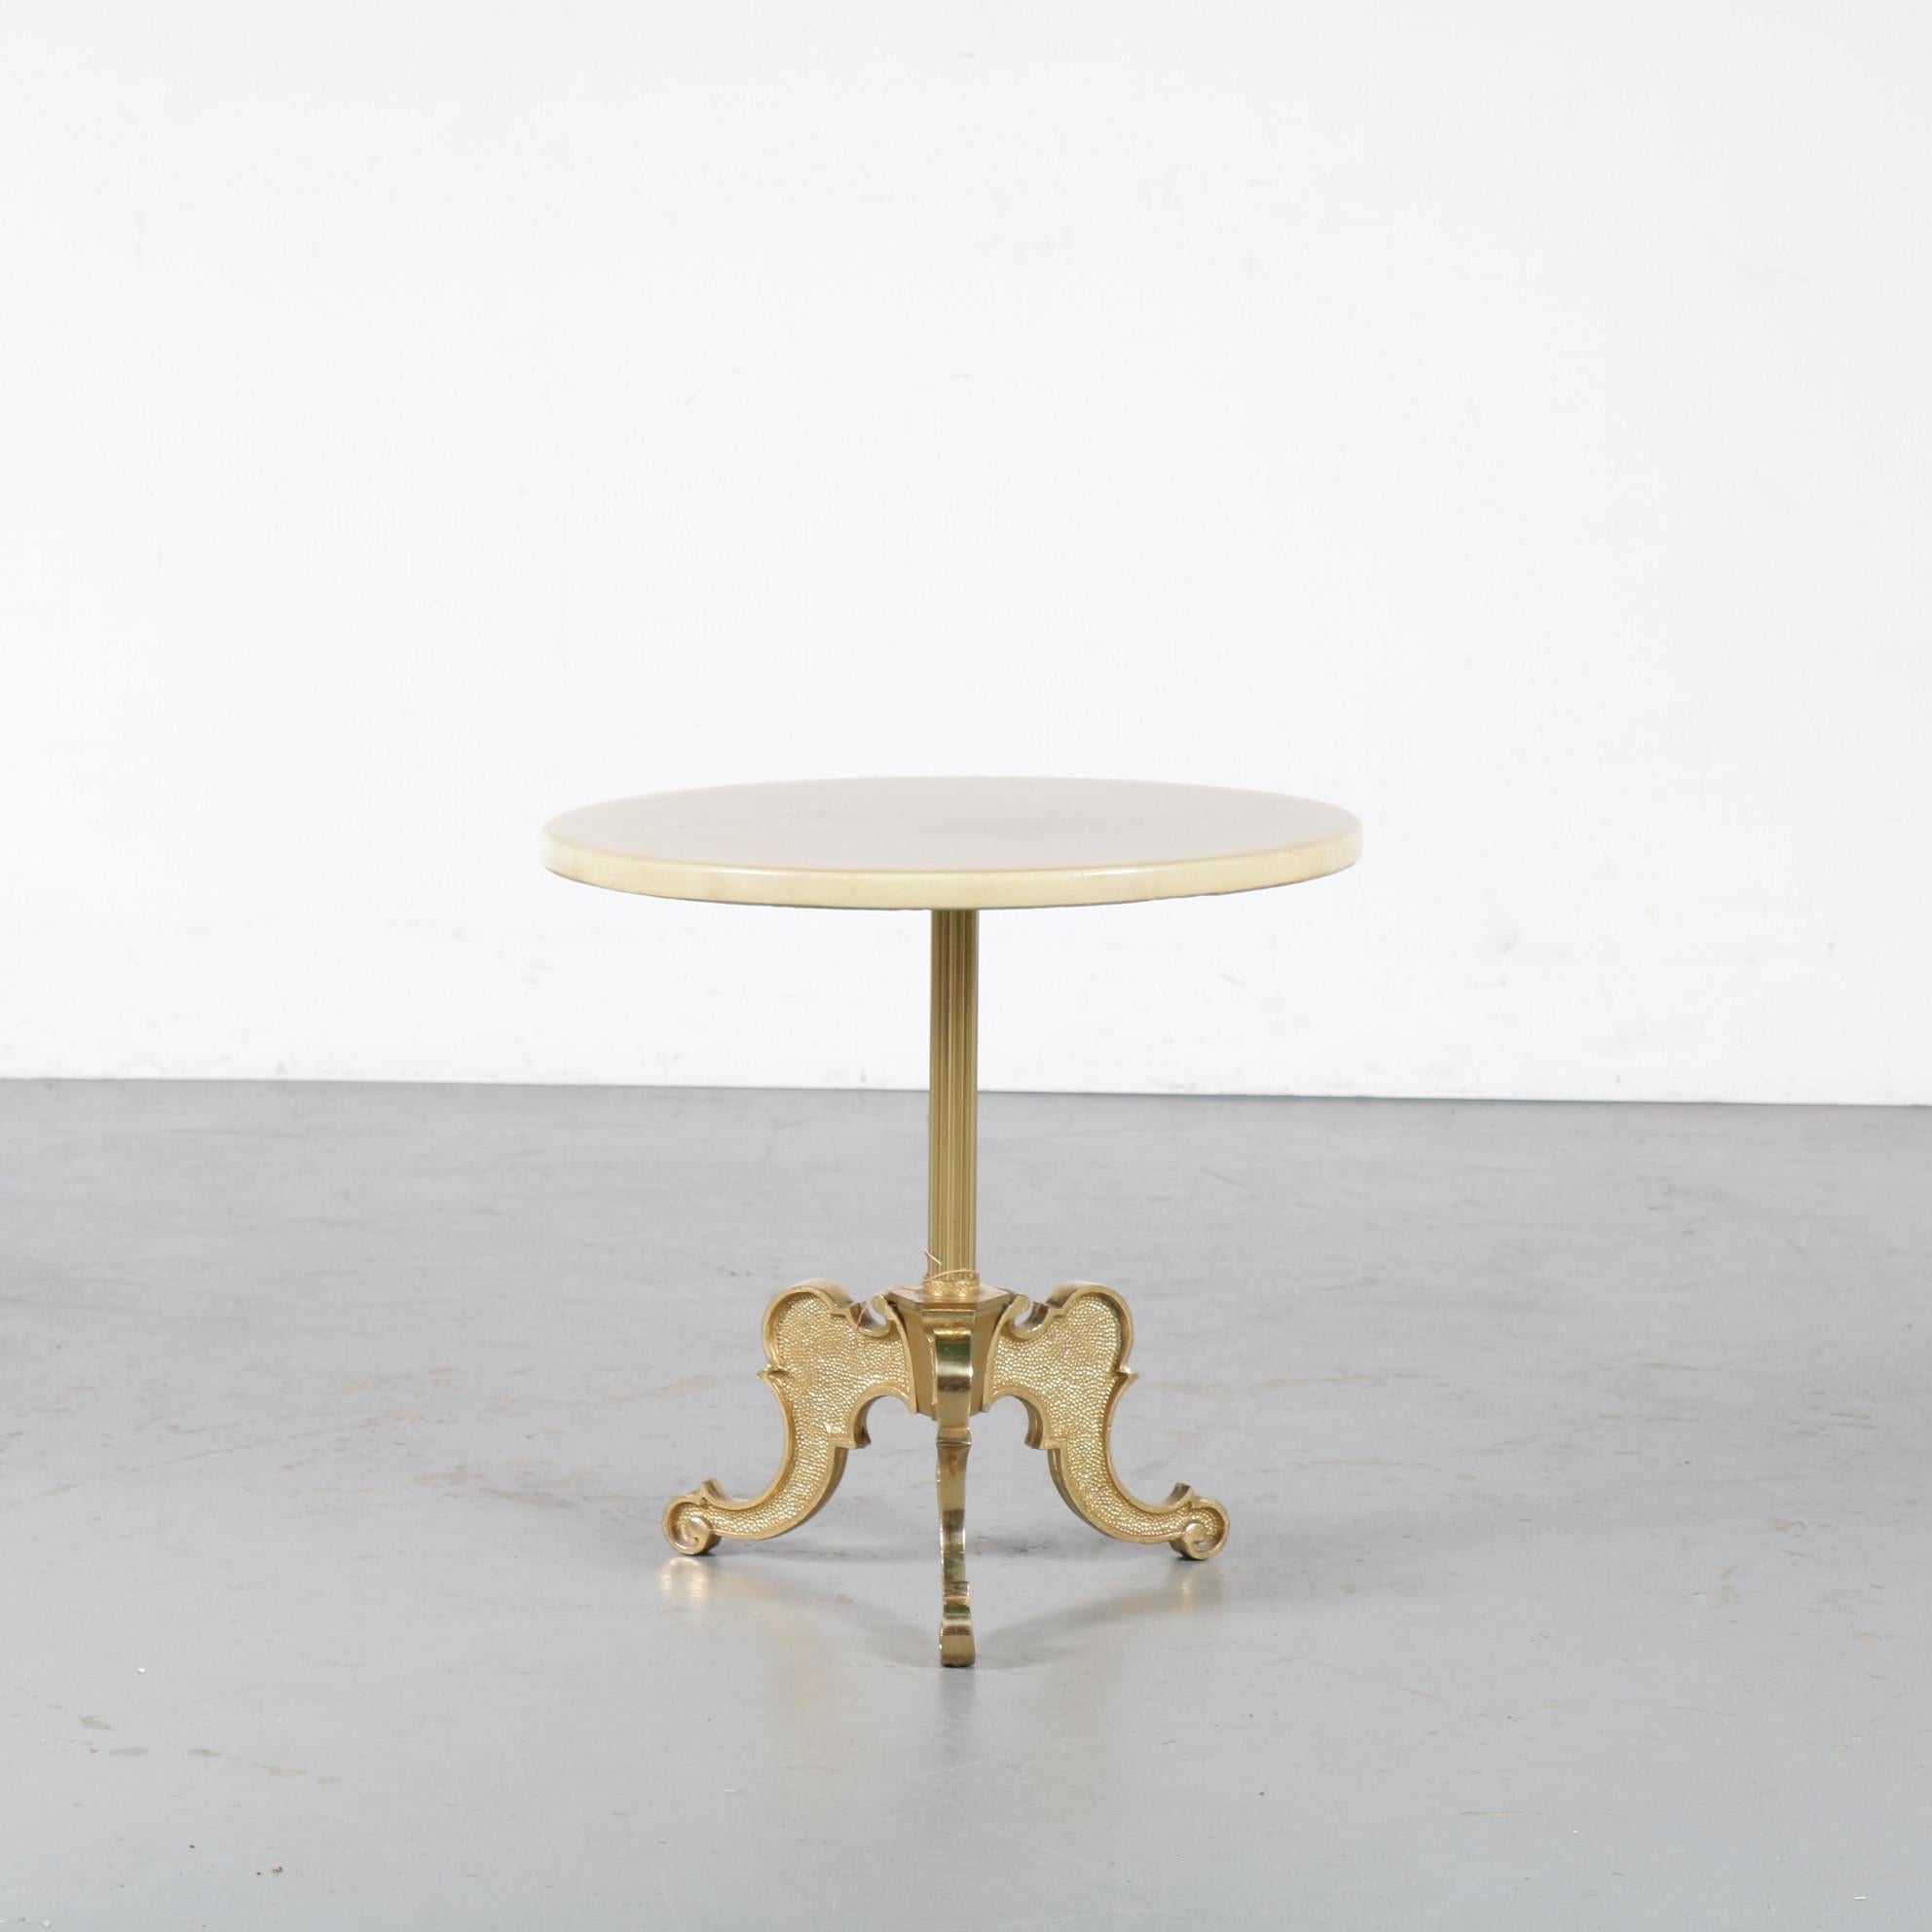 A beautiful side table or coffee table by Aldo Tura, manufactured in Italy around 1960.

This elegant piece is made of high quality brass with beautiful curved shapes, giving it a most luxurious appearance! The round top is made of goat skin,